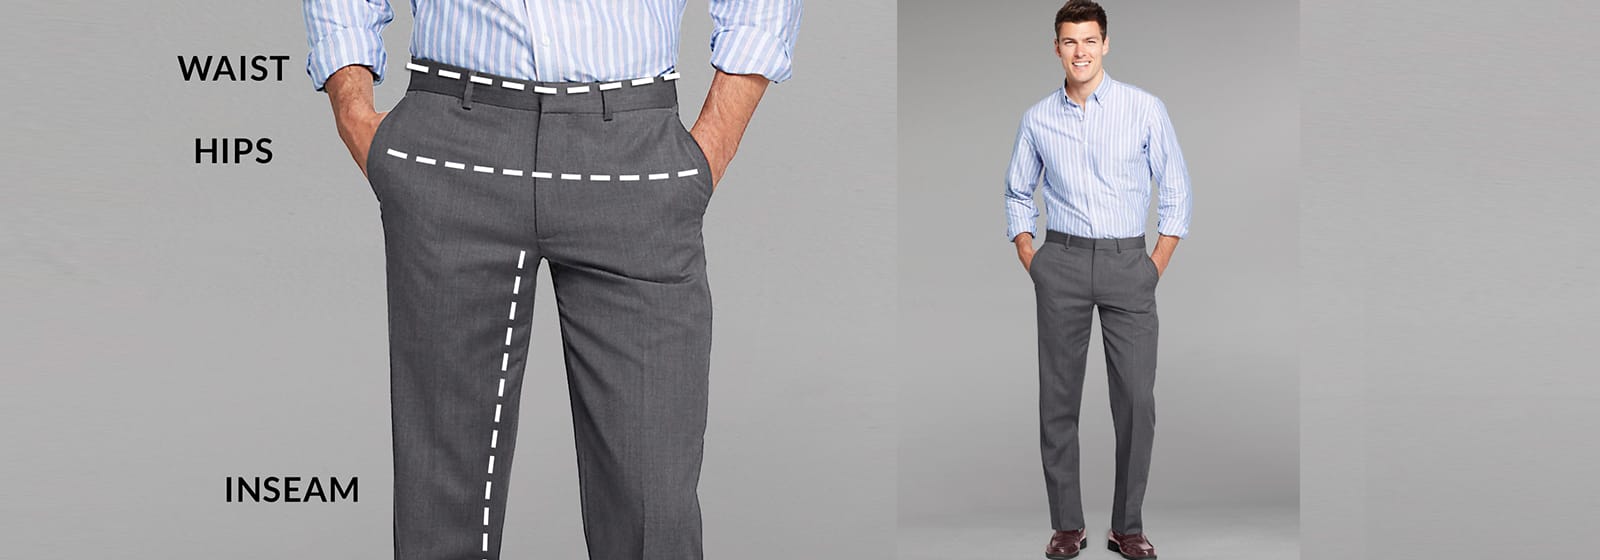 How to Measure Pants for Men